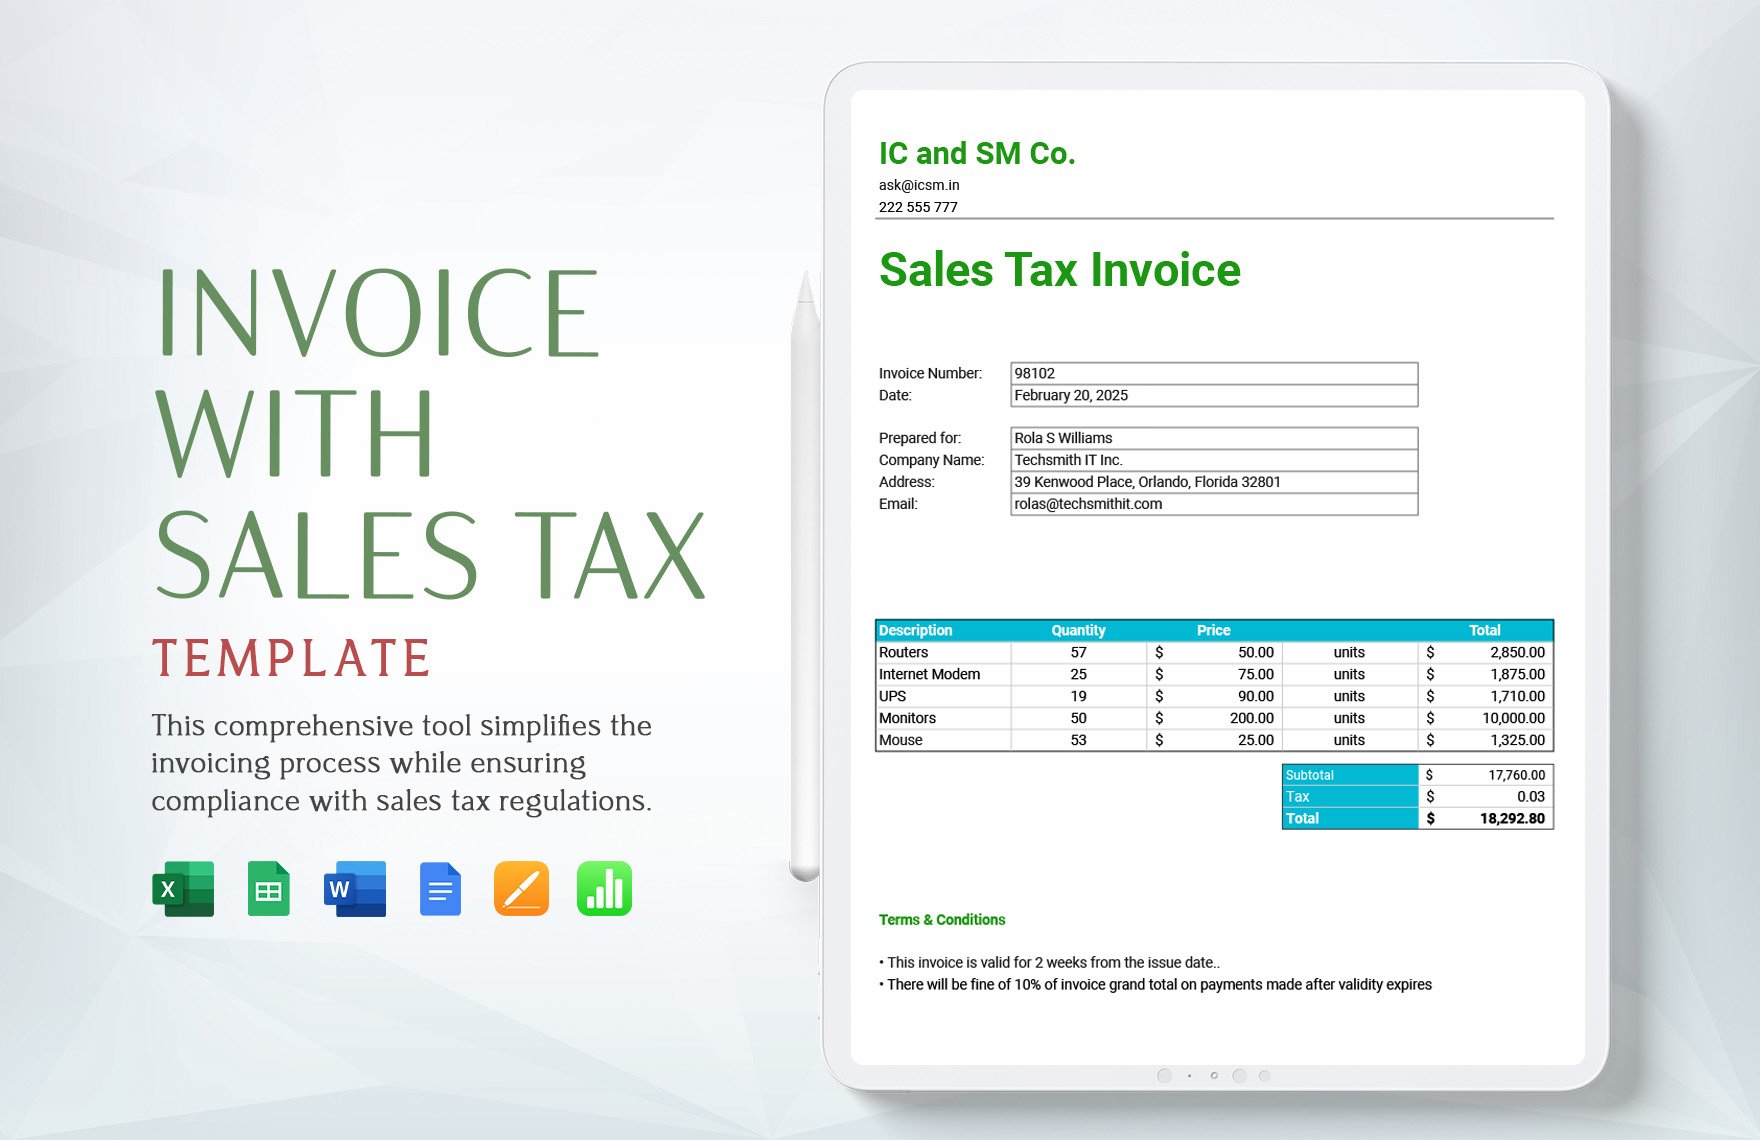 Invoice with Sales Tax Template in Word, Google Docs, Excel, Google Sheets, Apple Pages, Apple Numbers